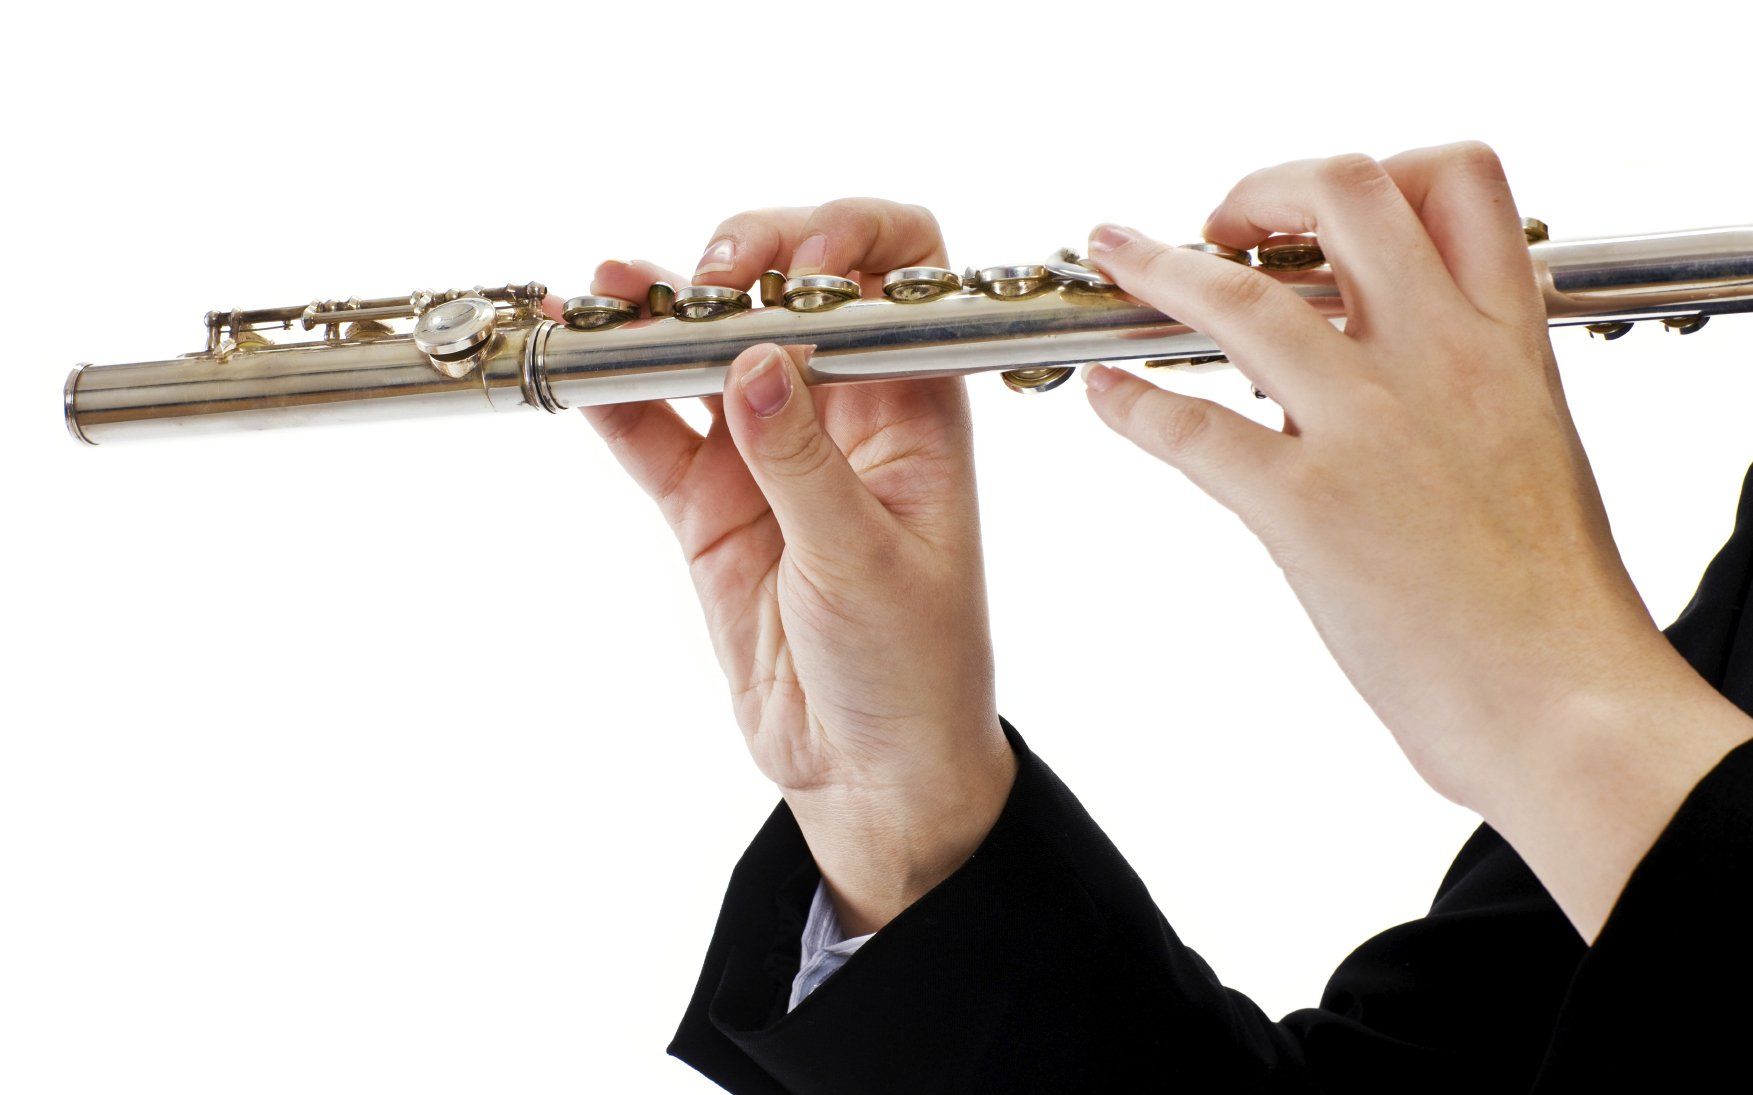 Hands of musician playing the flute.